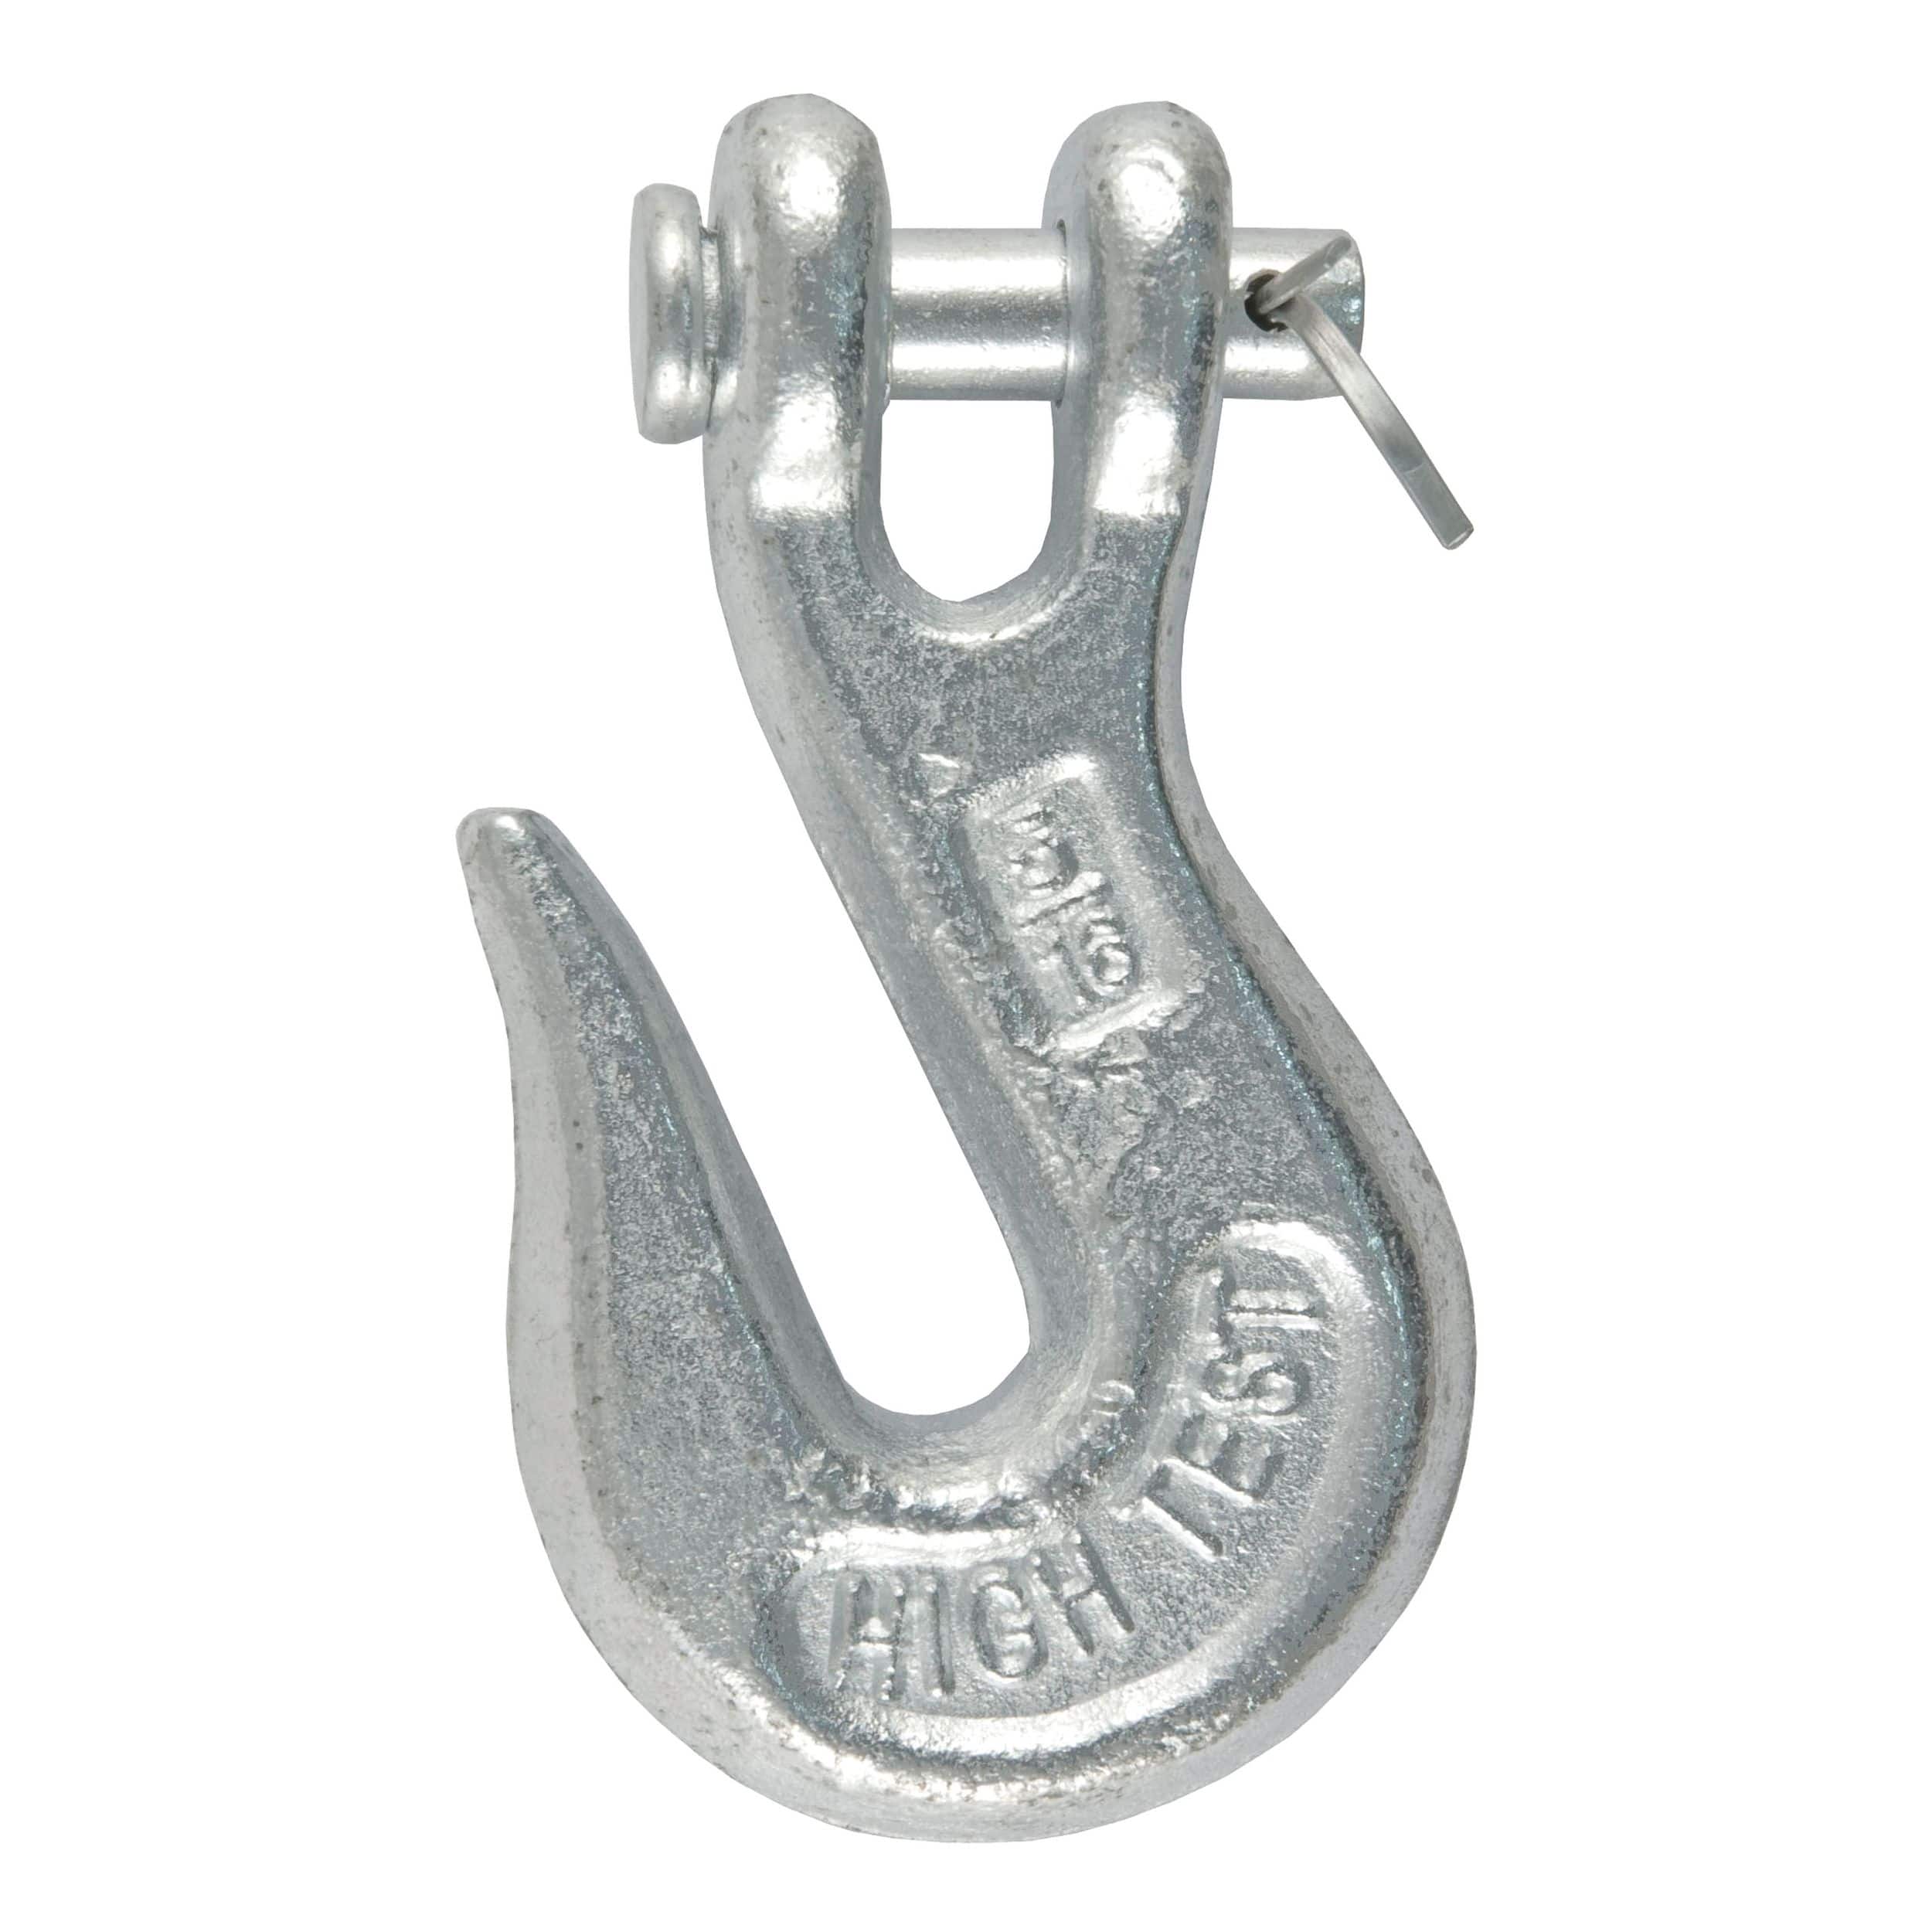 CURT Transport Binder Chain with Clevis Hooks